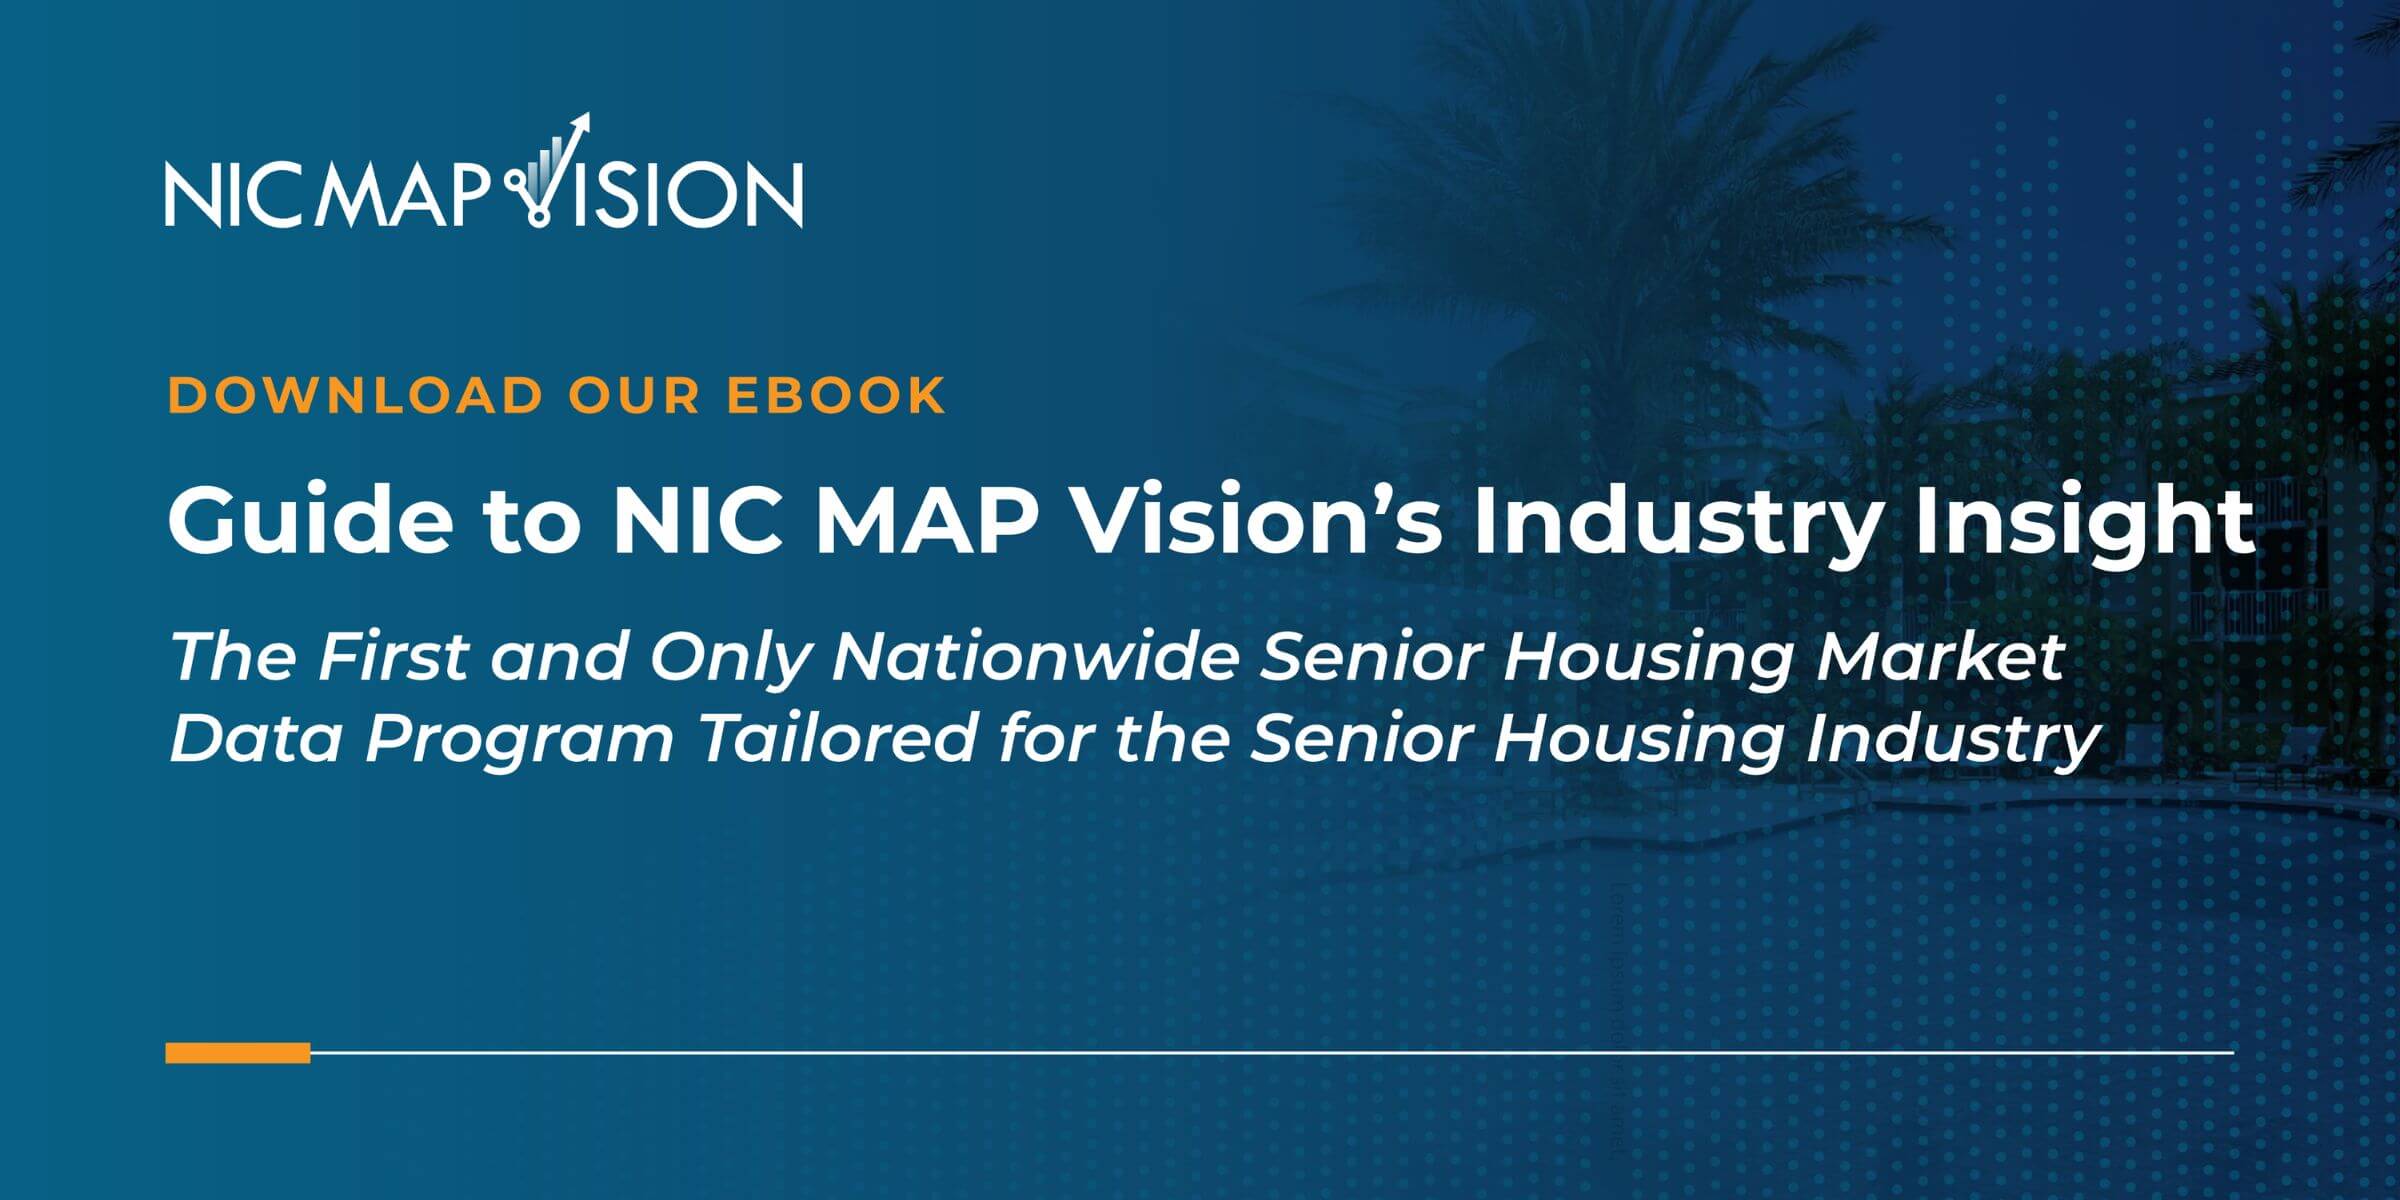 Guide to NIC MAP Vision’s Industry Insight